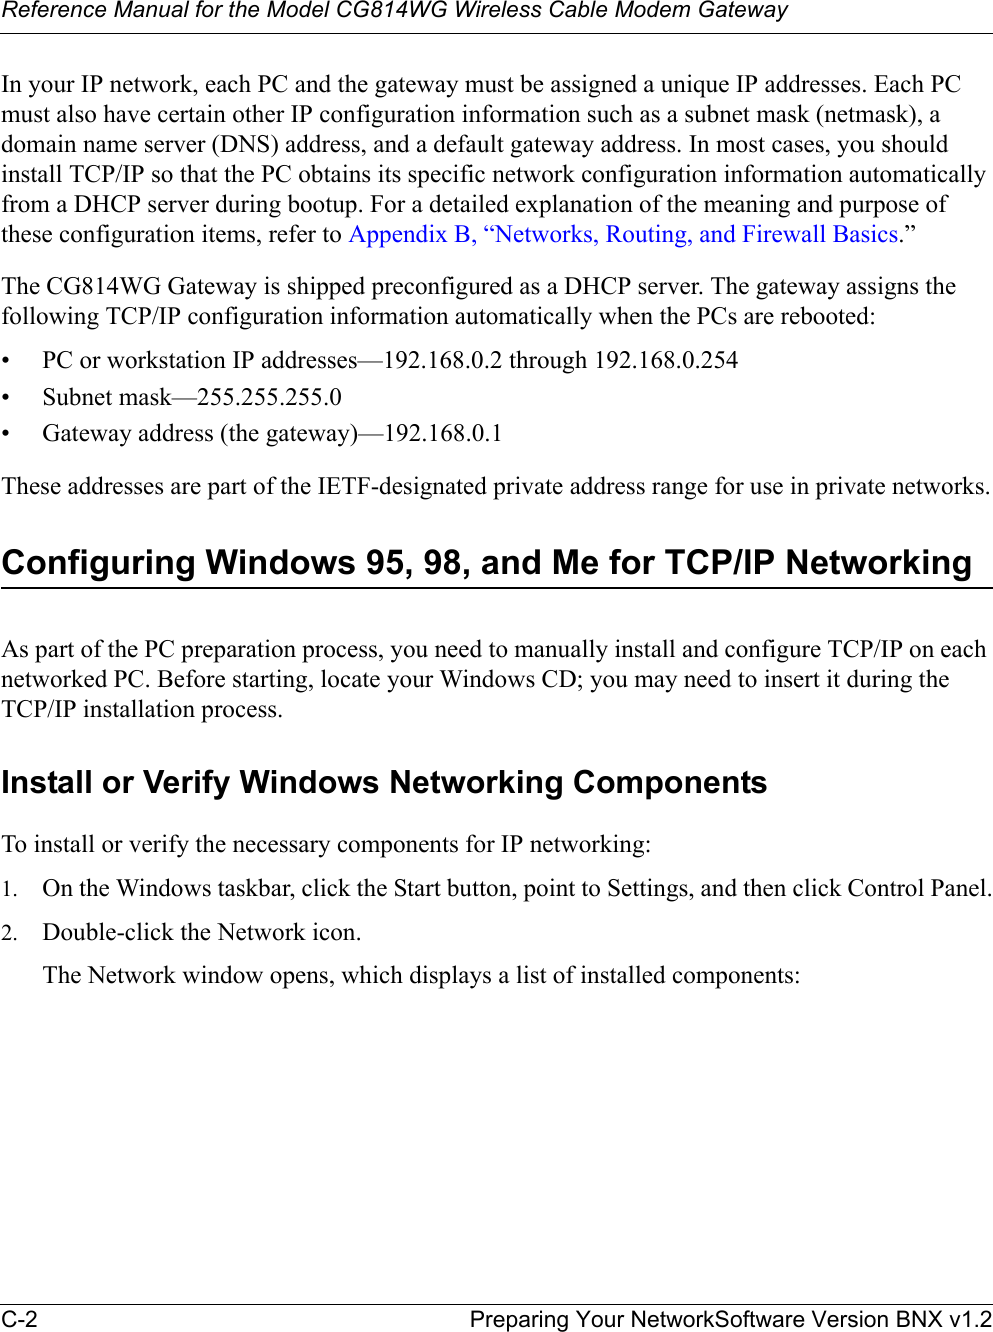 Reference Manual for the Model CG814WG Wireless Cable Modem GatewayC-2 Preparing Your NetworkSoftware Version BNX v1.2In your IP network, each PC and the gateway must be assigned a unique IP addresses. Each PC must also have certain other IP configuration information such as a subnet mask (netmask), a domain name server (DNS) address, and a default gateway address. In most cases, you should install TCP/IP so that the PC obtains its specific network configuration information automatically from a DHCP server during bootup. For a detailed explanation of the meaning and purpose of these configuration items, refer to Appendix B, “Networks, Routing, and Firewall Basics.”The CG814WG Gateway is shipped preconfigured as a DHCP server. The gateway assigns the following TCP/IP configuration information automatically when the PCs are rebooted:• PC or workstation IP addresses—192.168.0.2 through 192.168.0.254• Subnet mask—255.255.255.0• Gateway address (the gateway)—192.168.0.1These addresses are part of the IETF-designated private address range for use in private networks.Configuring Windows 95, 98, and Me for TCP/IP NetworkingAs part of the PC preparation process, you need to manually install and configure TCP/IP on each networked PC. Before starting, locate your Windows CD; you may need to insert it during the TCP/IP installation process.Install or Verify Windows Networking ComponentsTo install or verify the necessary components for IP networking:1. On the Windows taskbar, click the Start button, point to Settings, and then click Control Panel.2. Double-click the Network icon.The Network window opens, which displays a list of installed components: